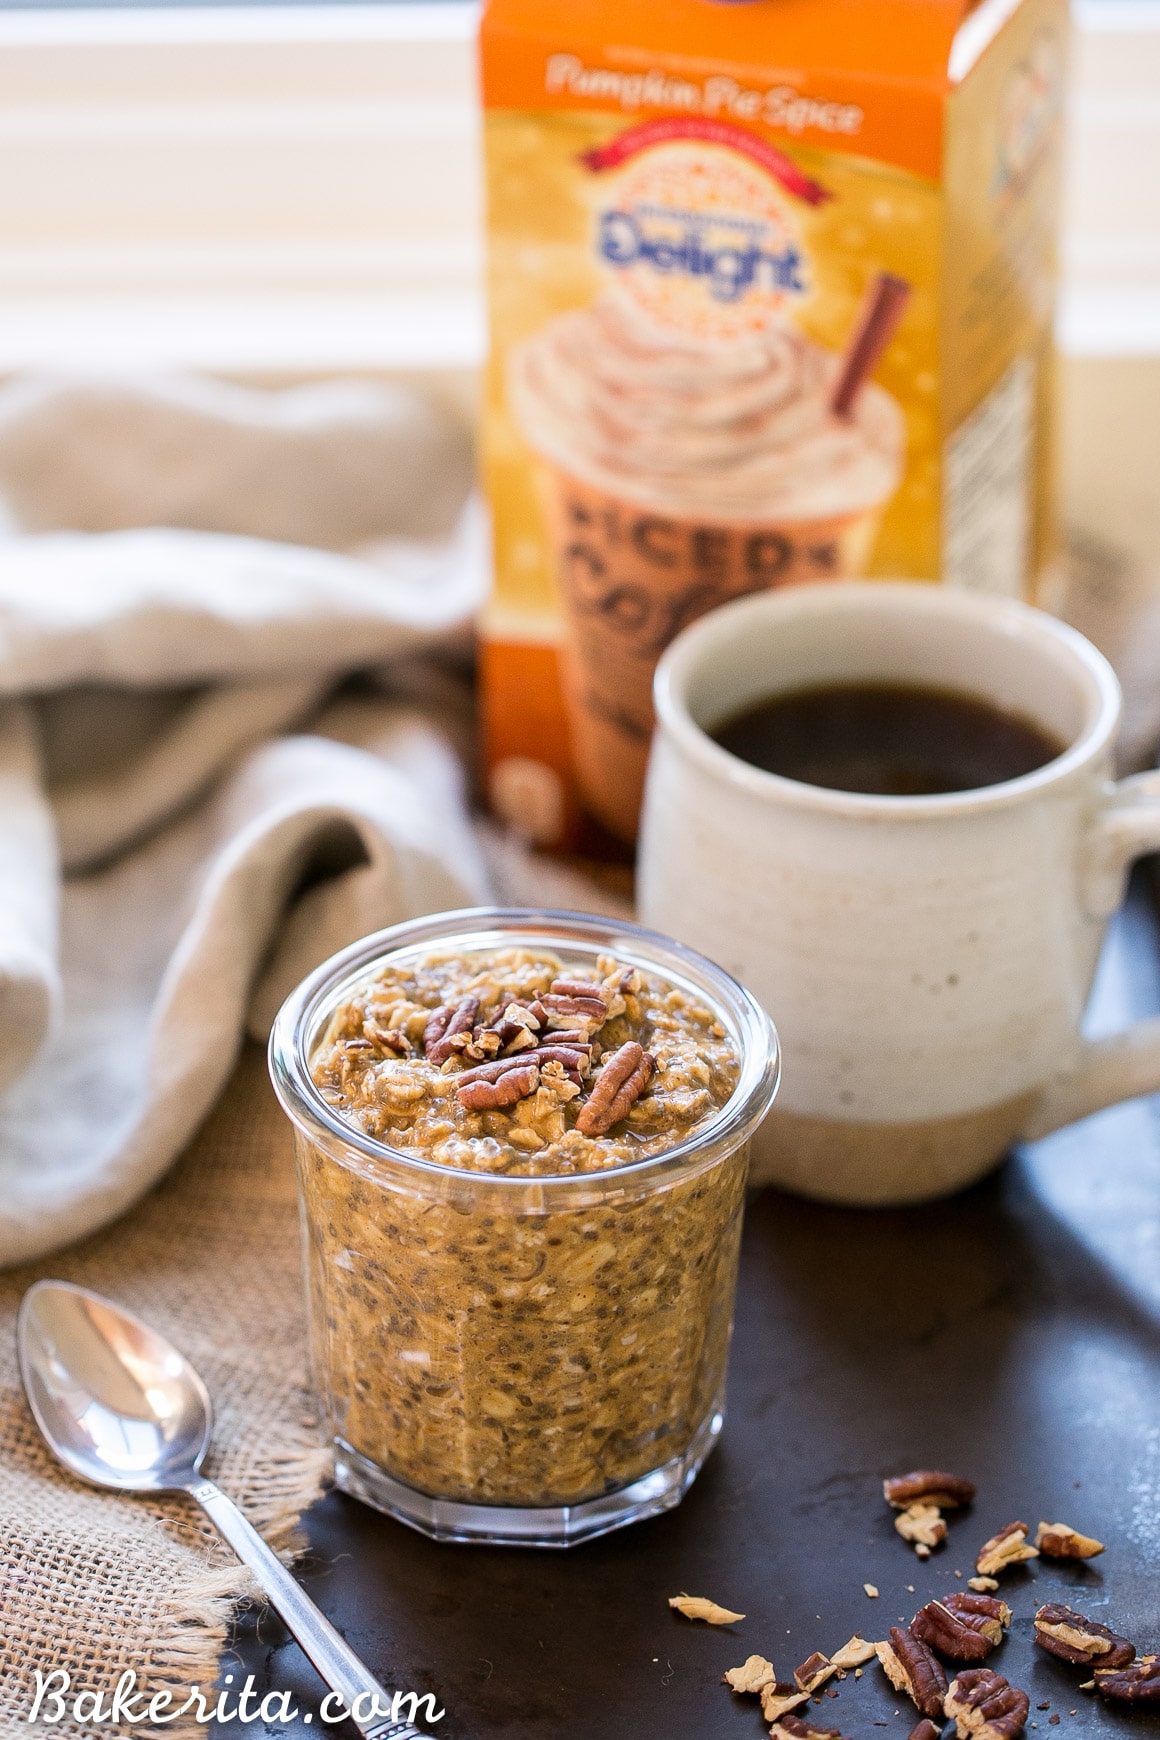 These Pumpkin Spice Latte Overnight Oats, with pumpkin puree and cinnamon, will help you start your morning deliciously! Prep only takes a few minutes and they can be enjoyed straight from the fridge or warmed up.